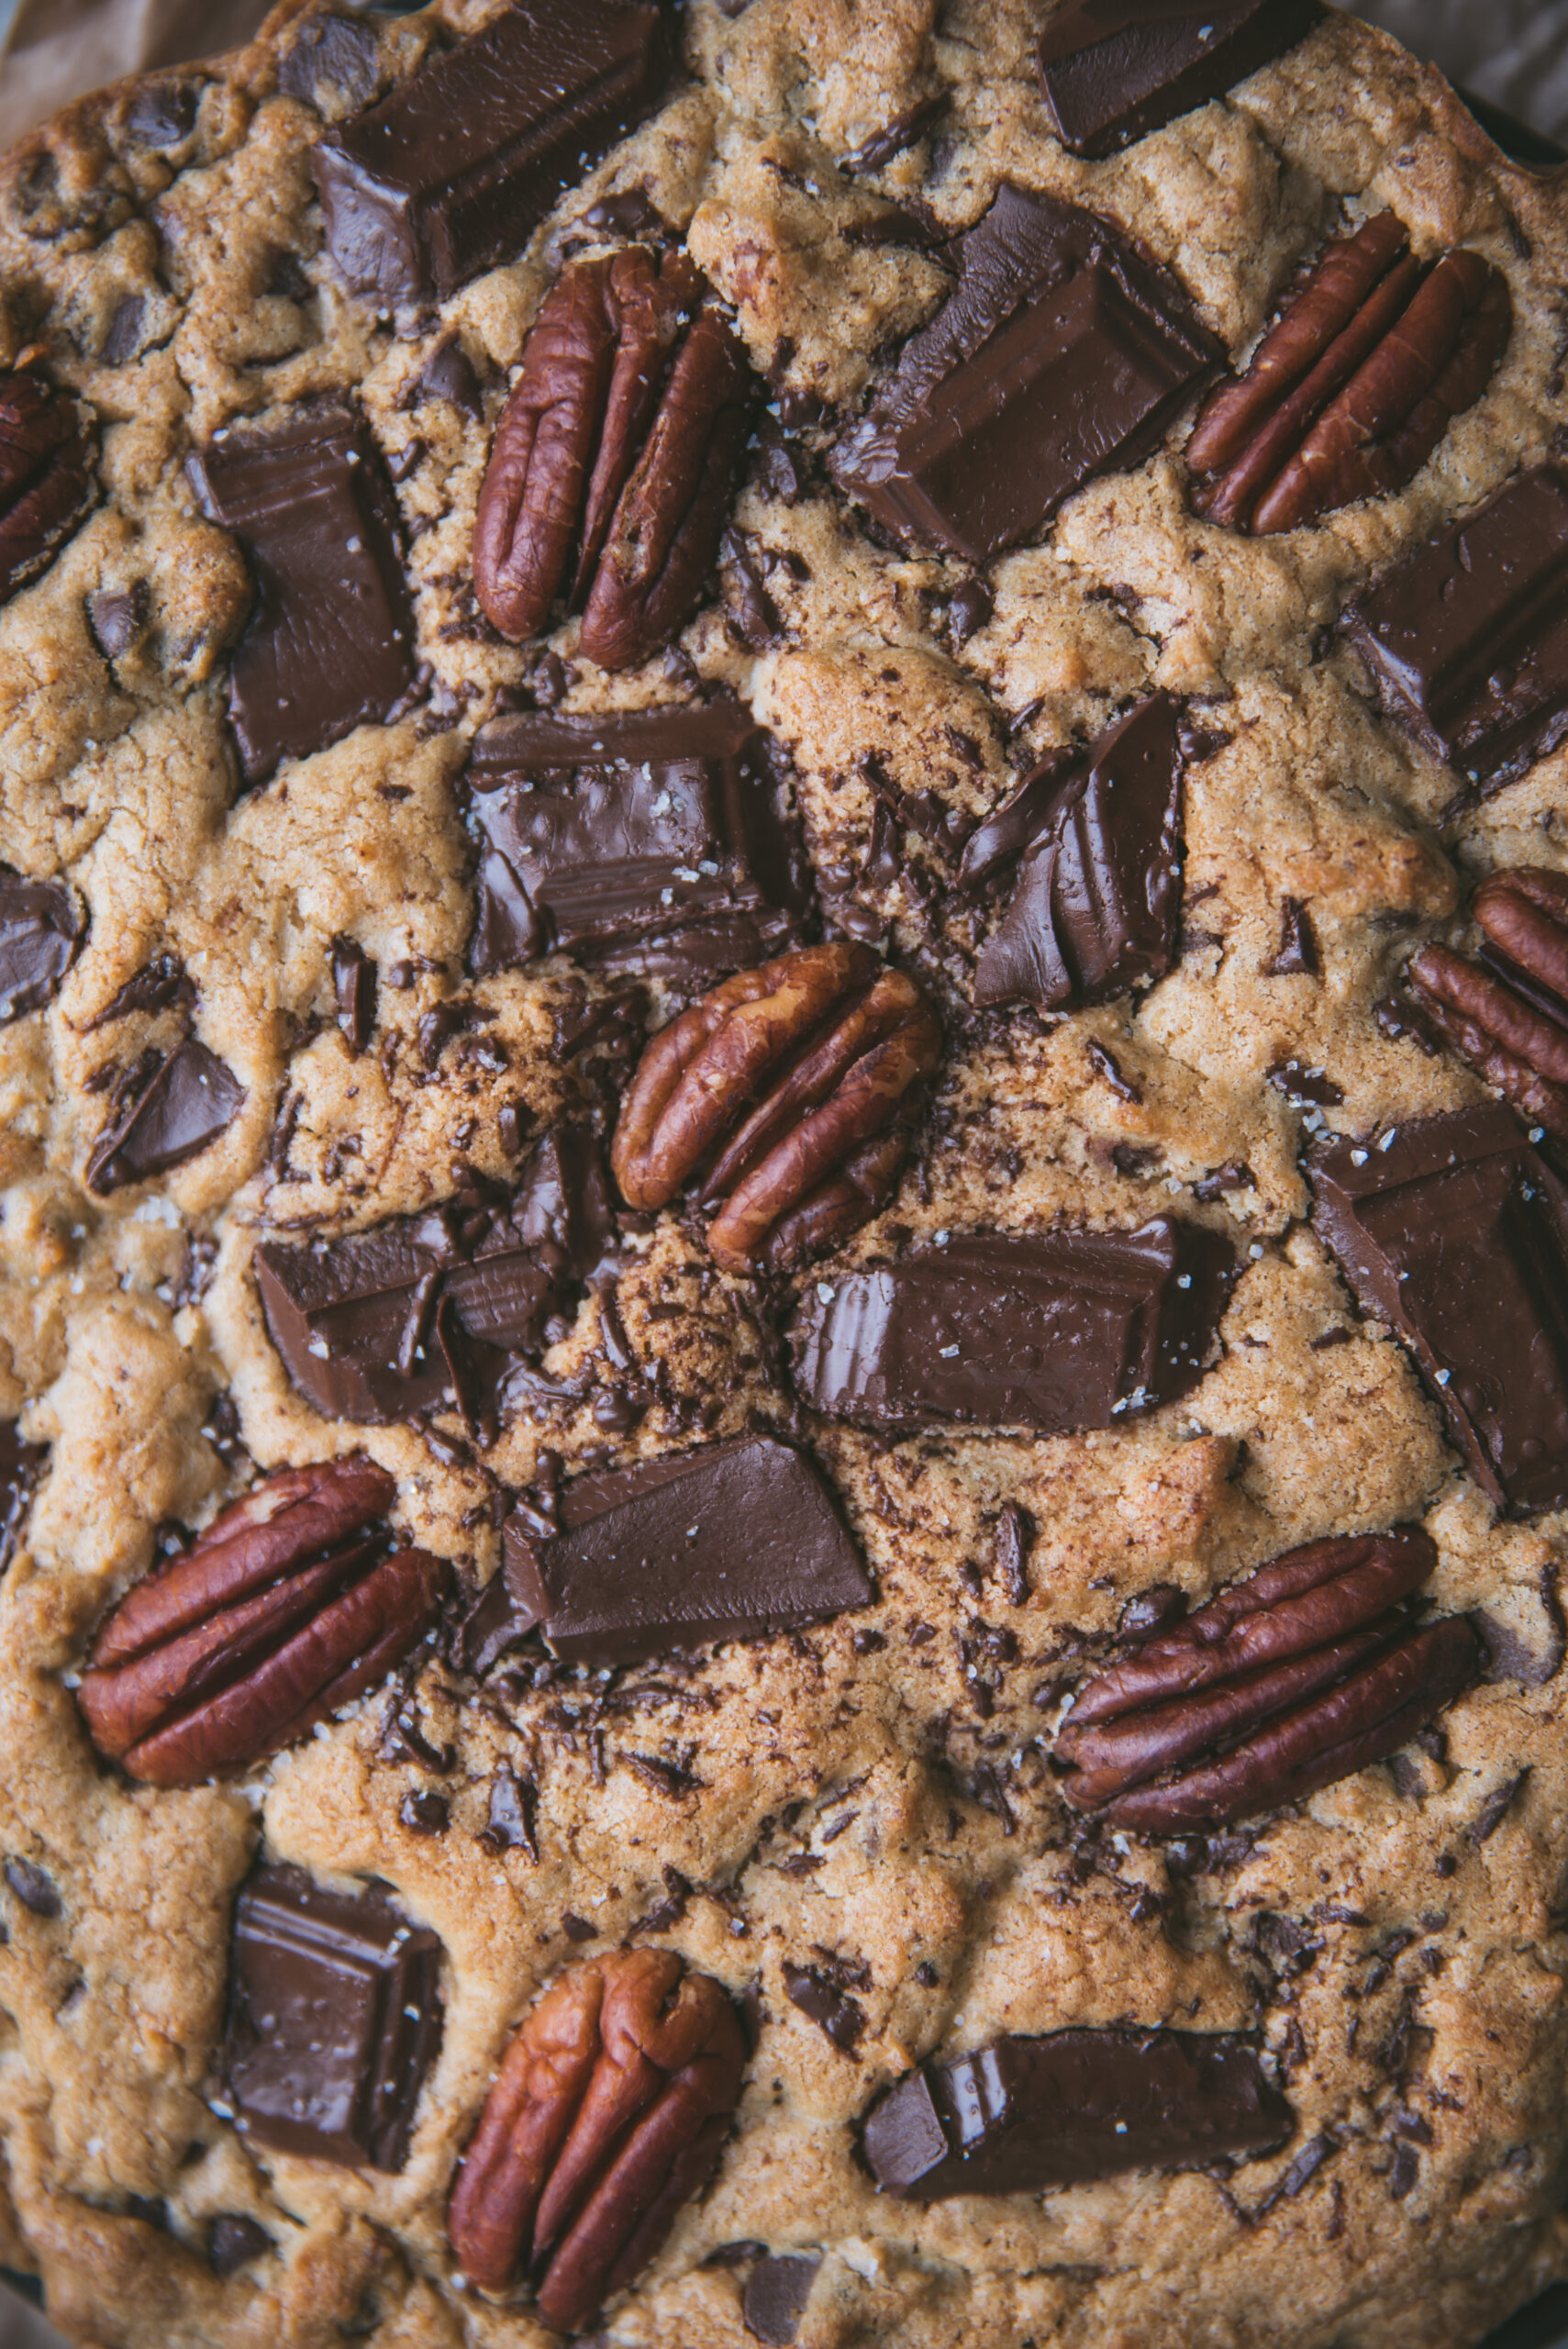 Giant Chocolate Chip Cookie Recipe